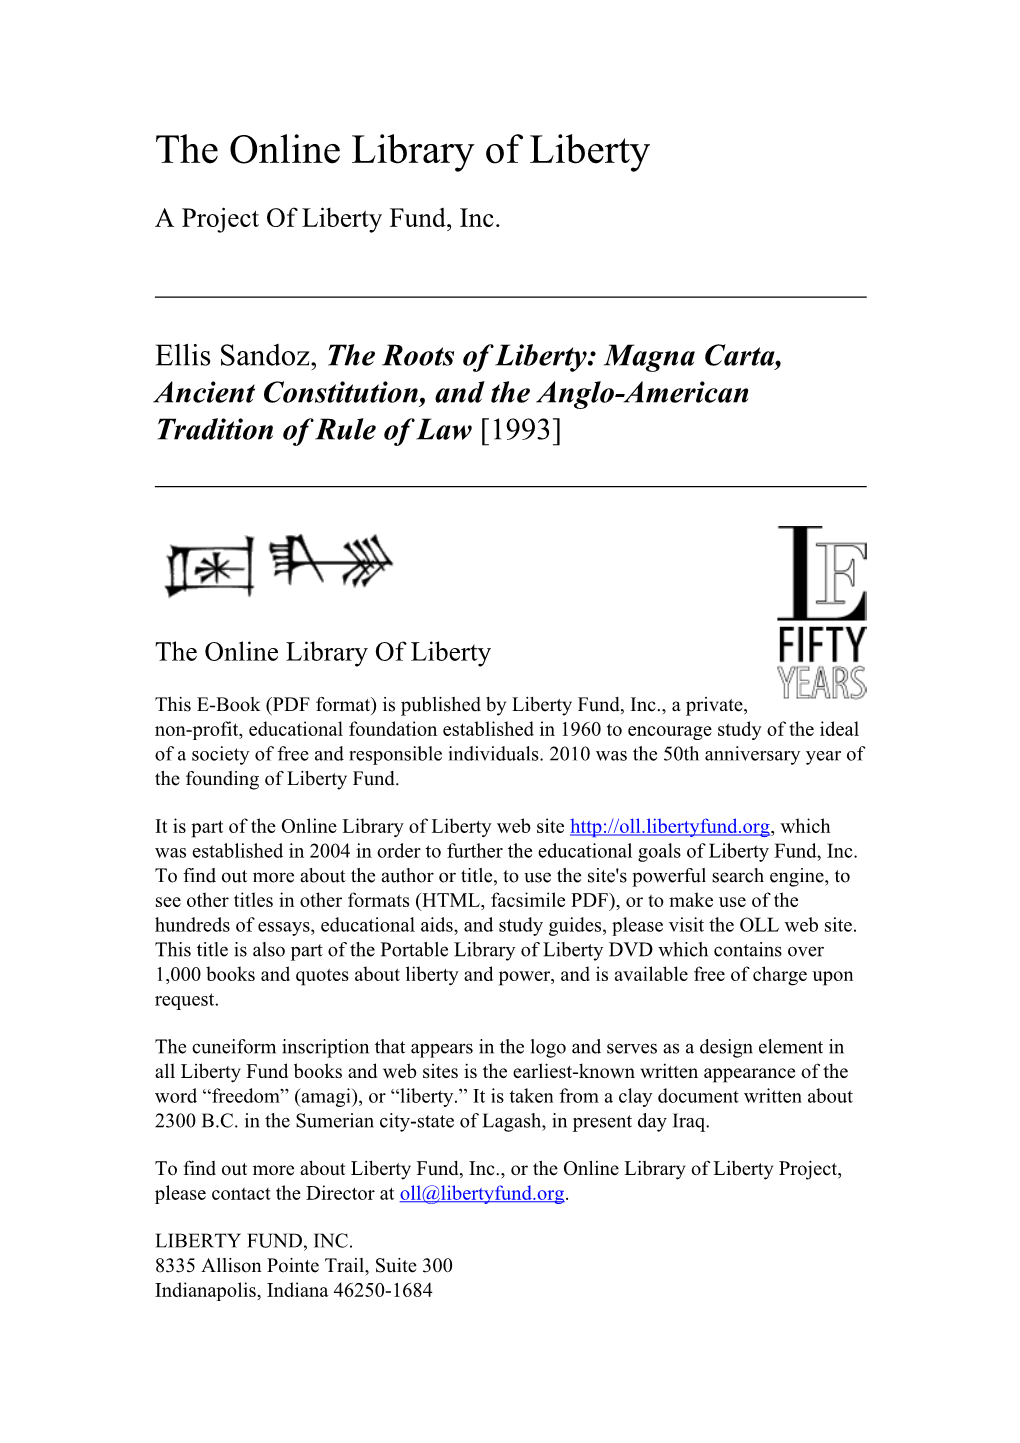 Magna Carta, Ancient Constitution, and the Anglo-American Tradition of Rule of Law [1993]